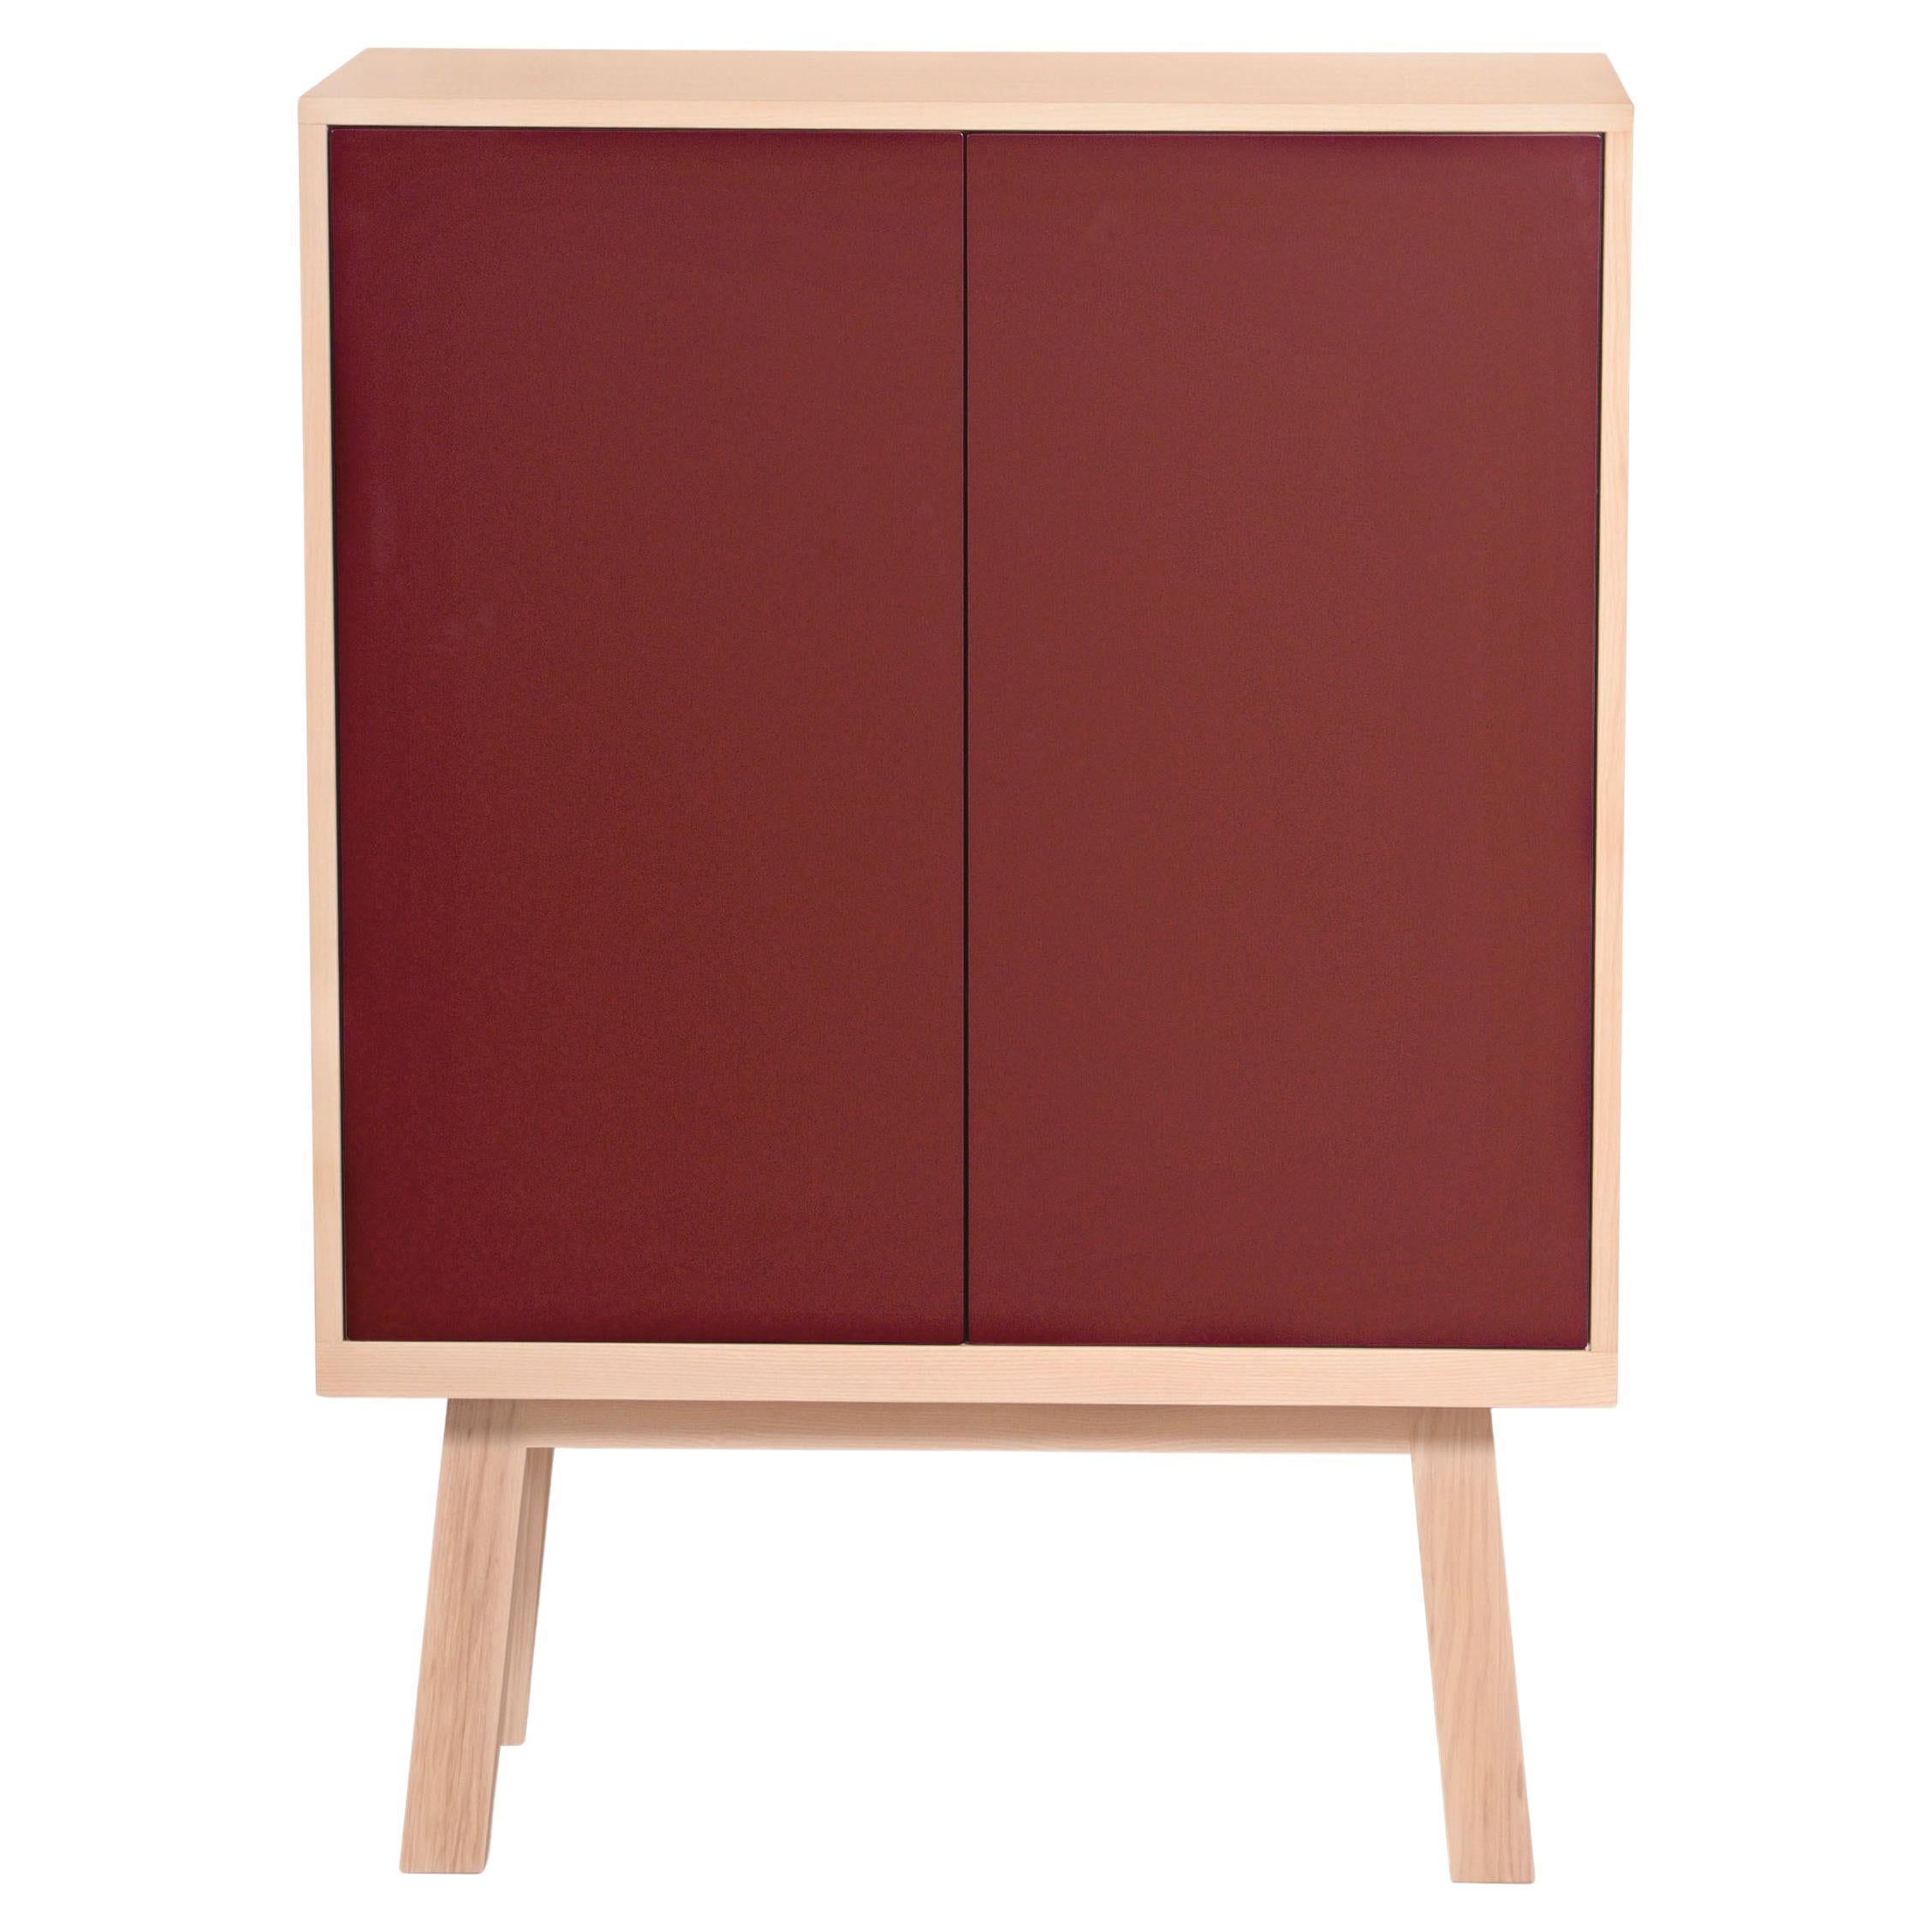 Red 2-Door Cabinet Égée in Ash Wood from Pefc-Certified French Forests